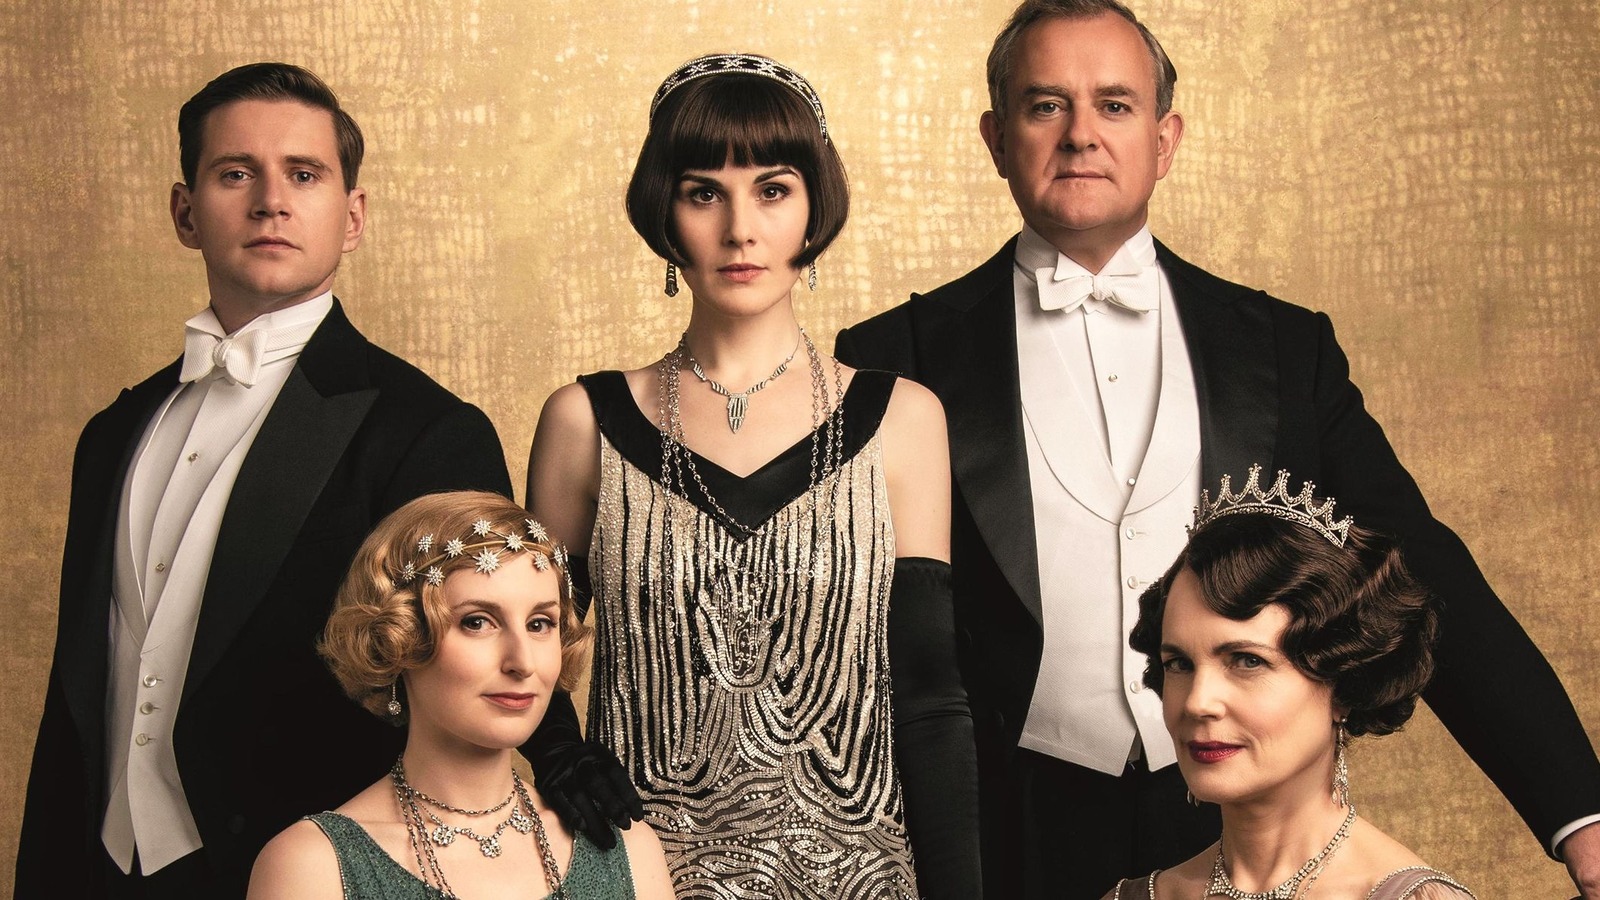 Downton Abbey: A New Era: Release Date, Cast And More